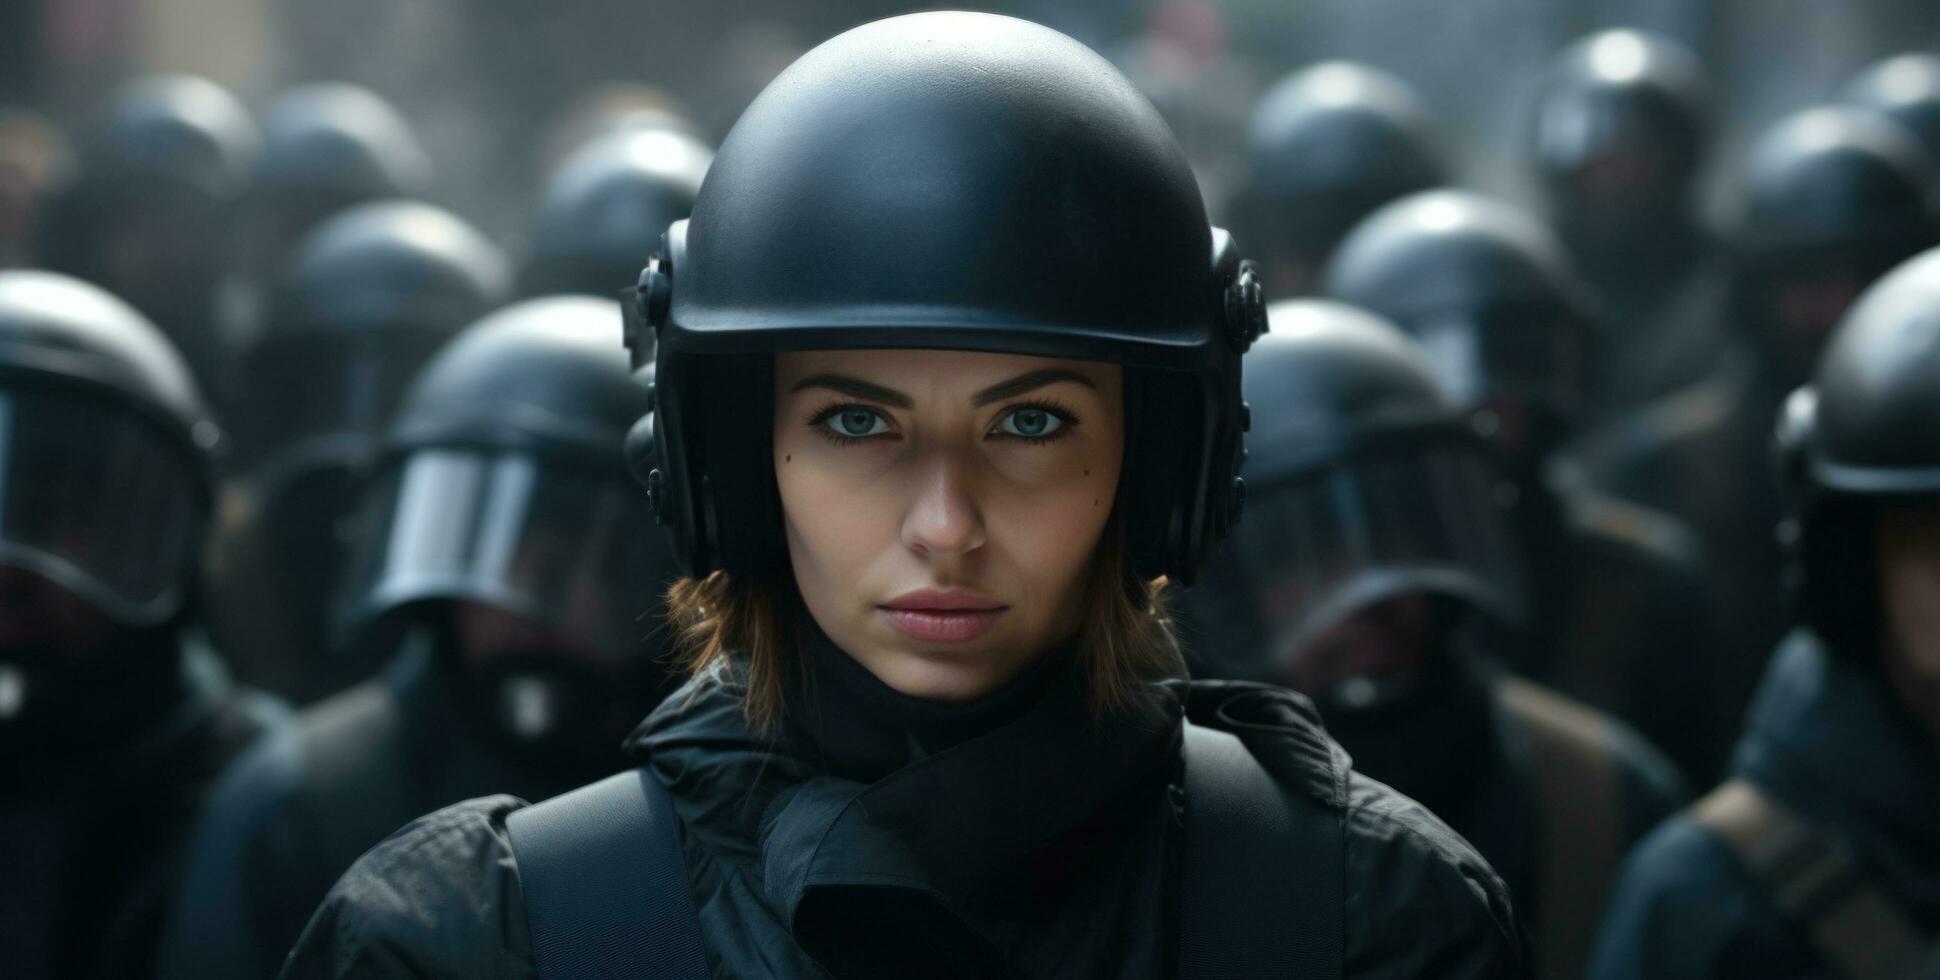 AI generated a woman in a helmet and an armed protest photo